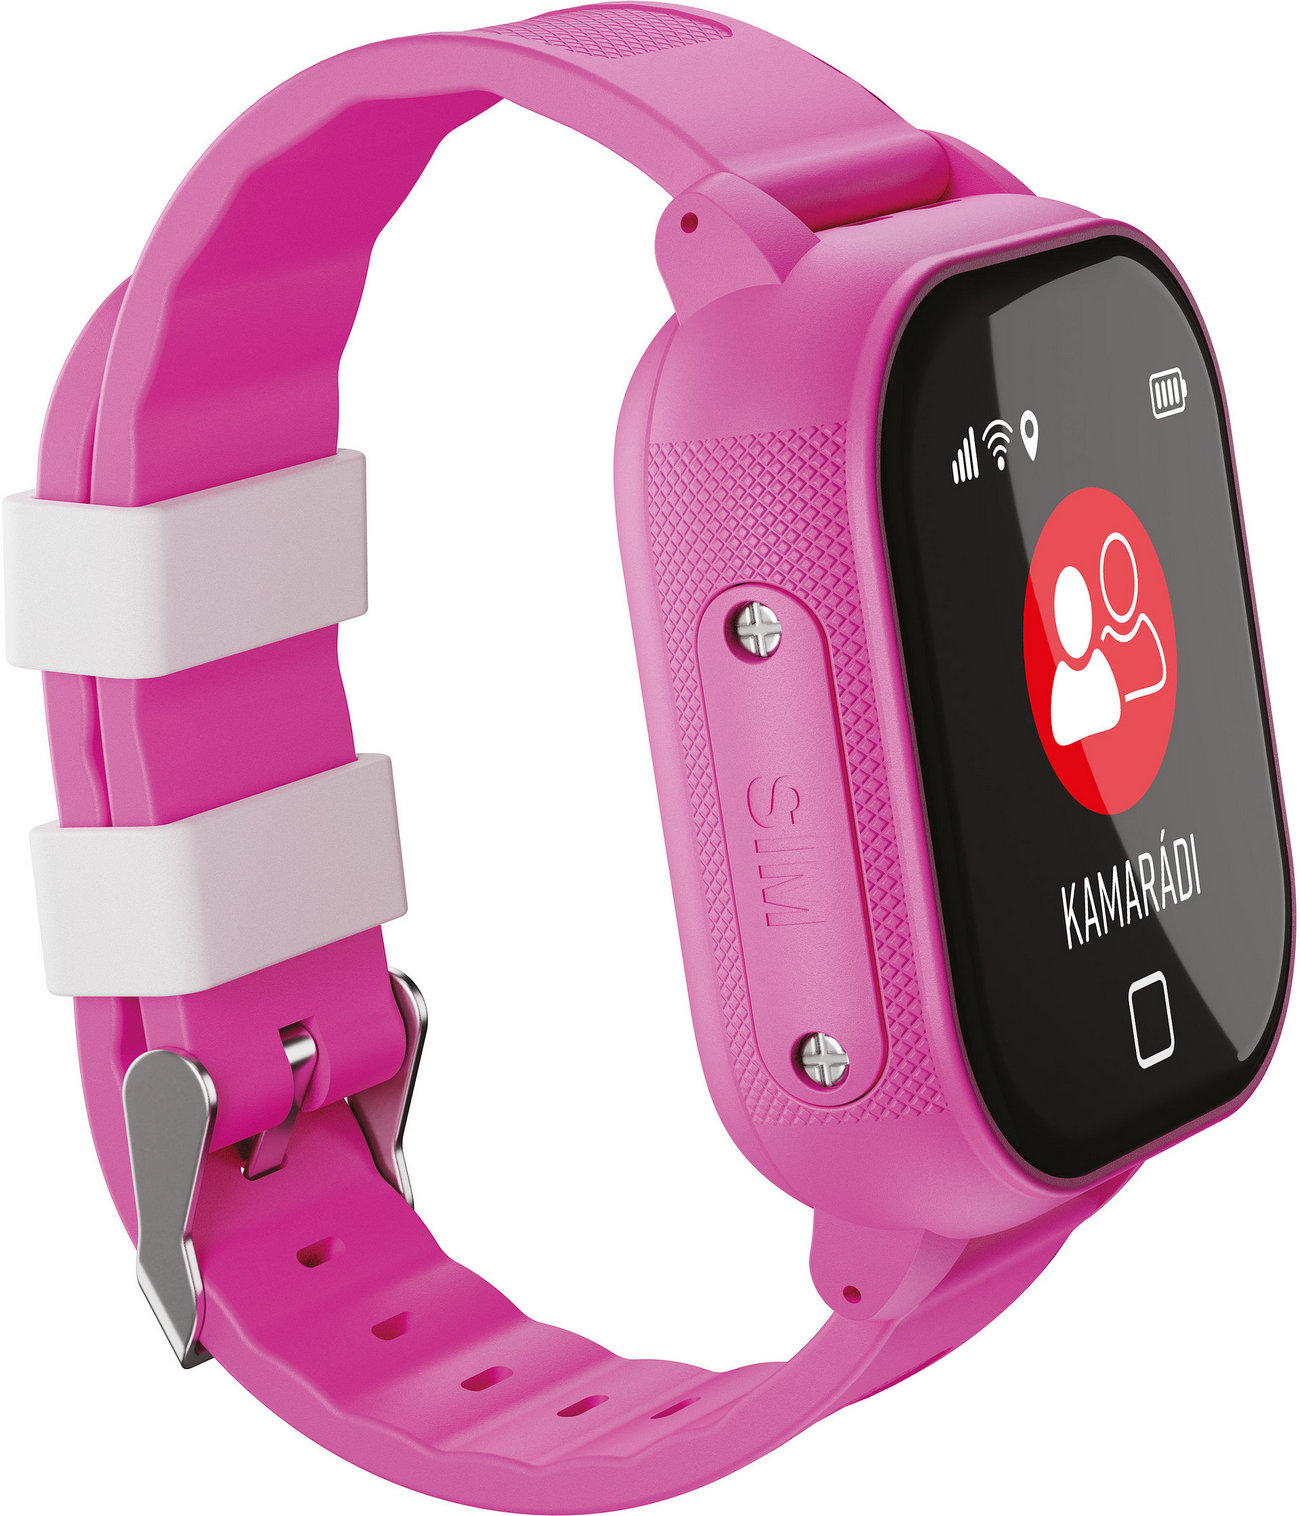 LAMAX WATCHY2 PINK LMXWY2P